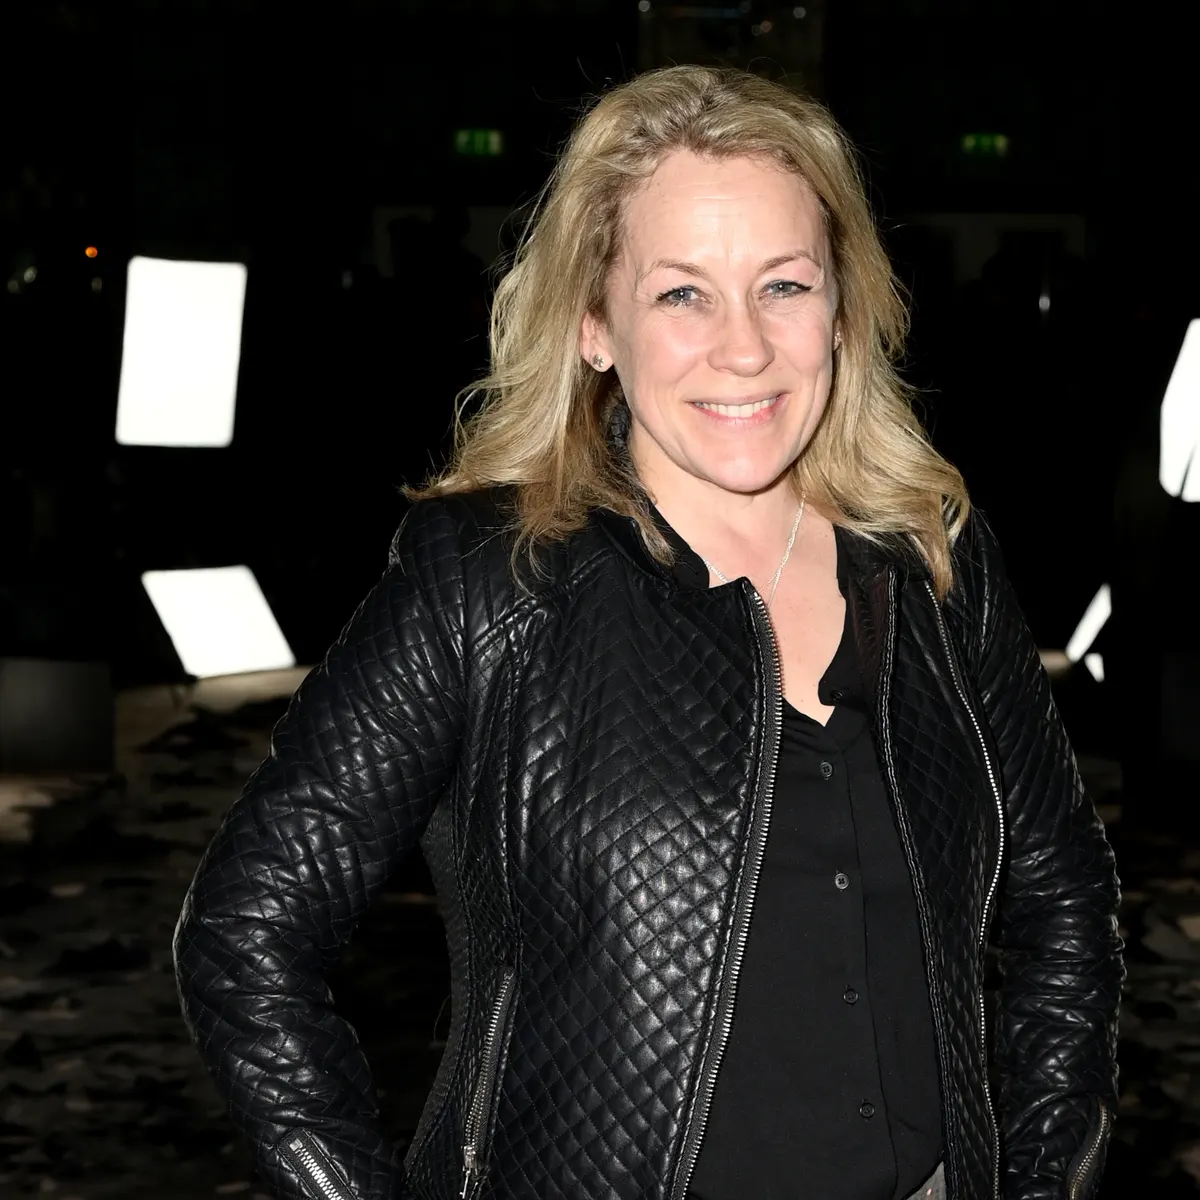 What do we know about Sarah Beeny